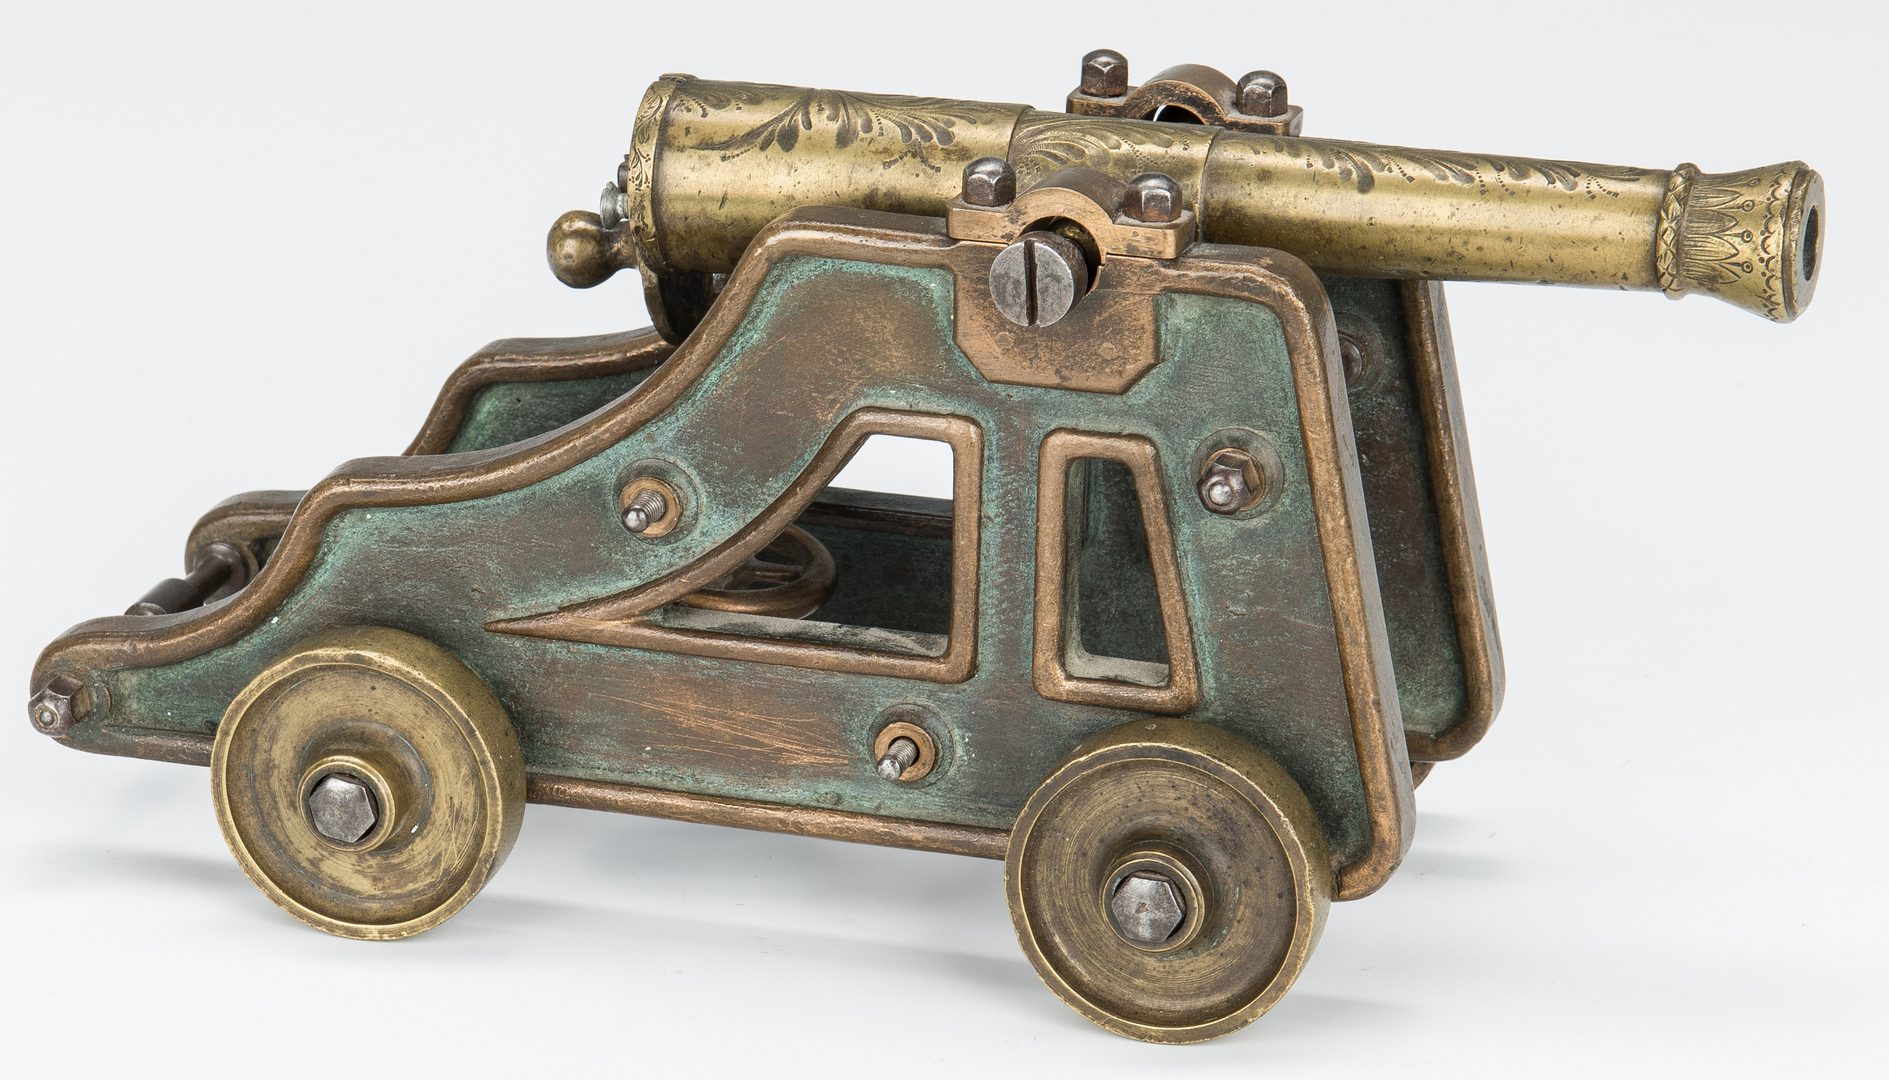 Lot 107: Grenfell Type Rug, Document Box, Inkwell, Miniature Bronze Cannon